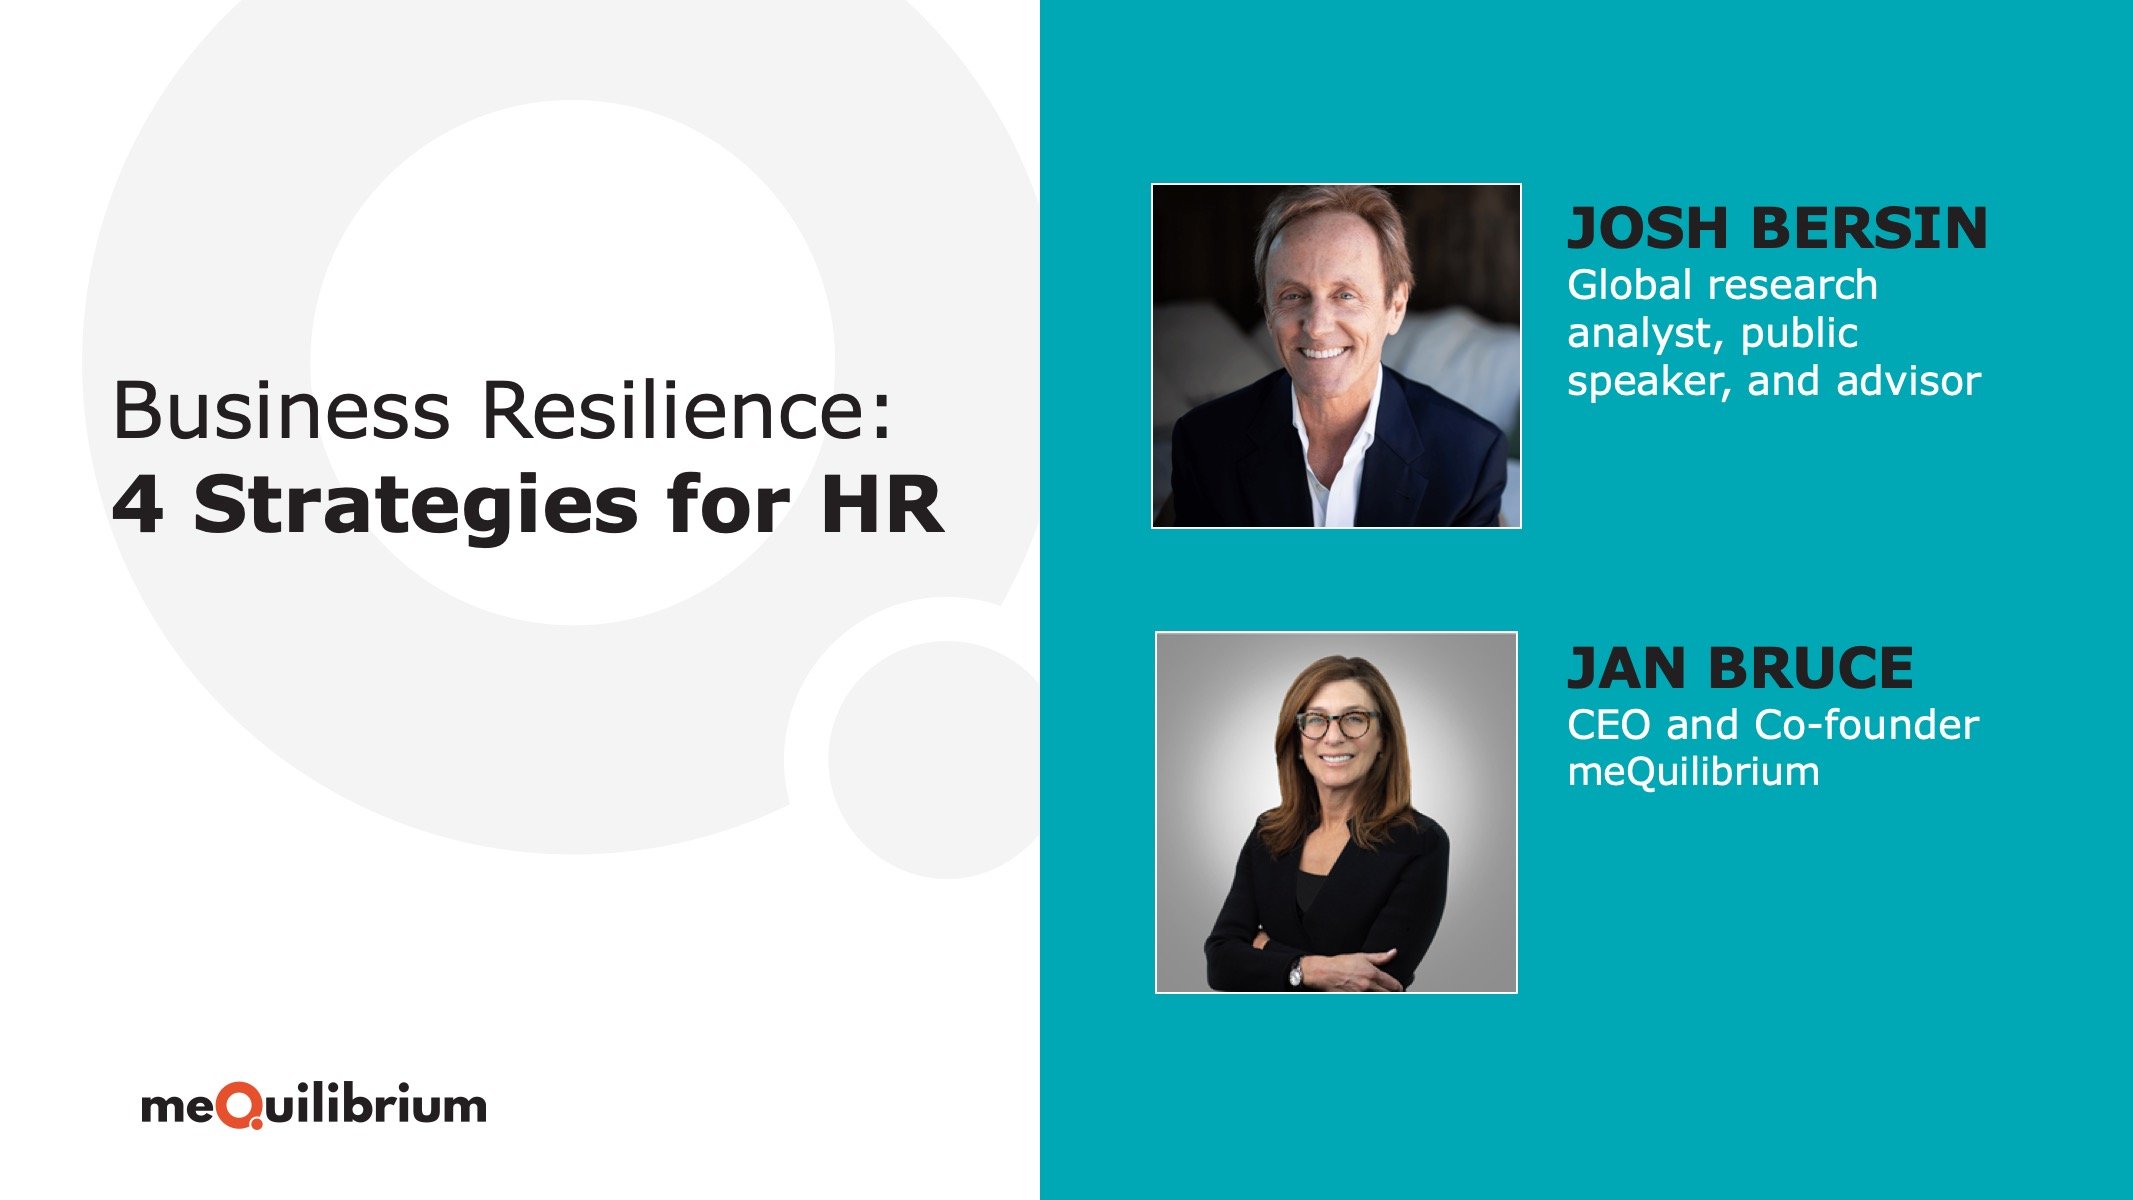 Business Resilience: 4 Strategies for HR